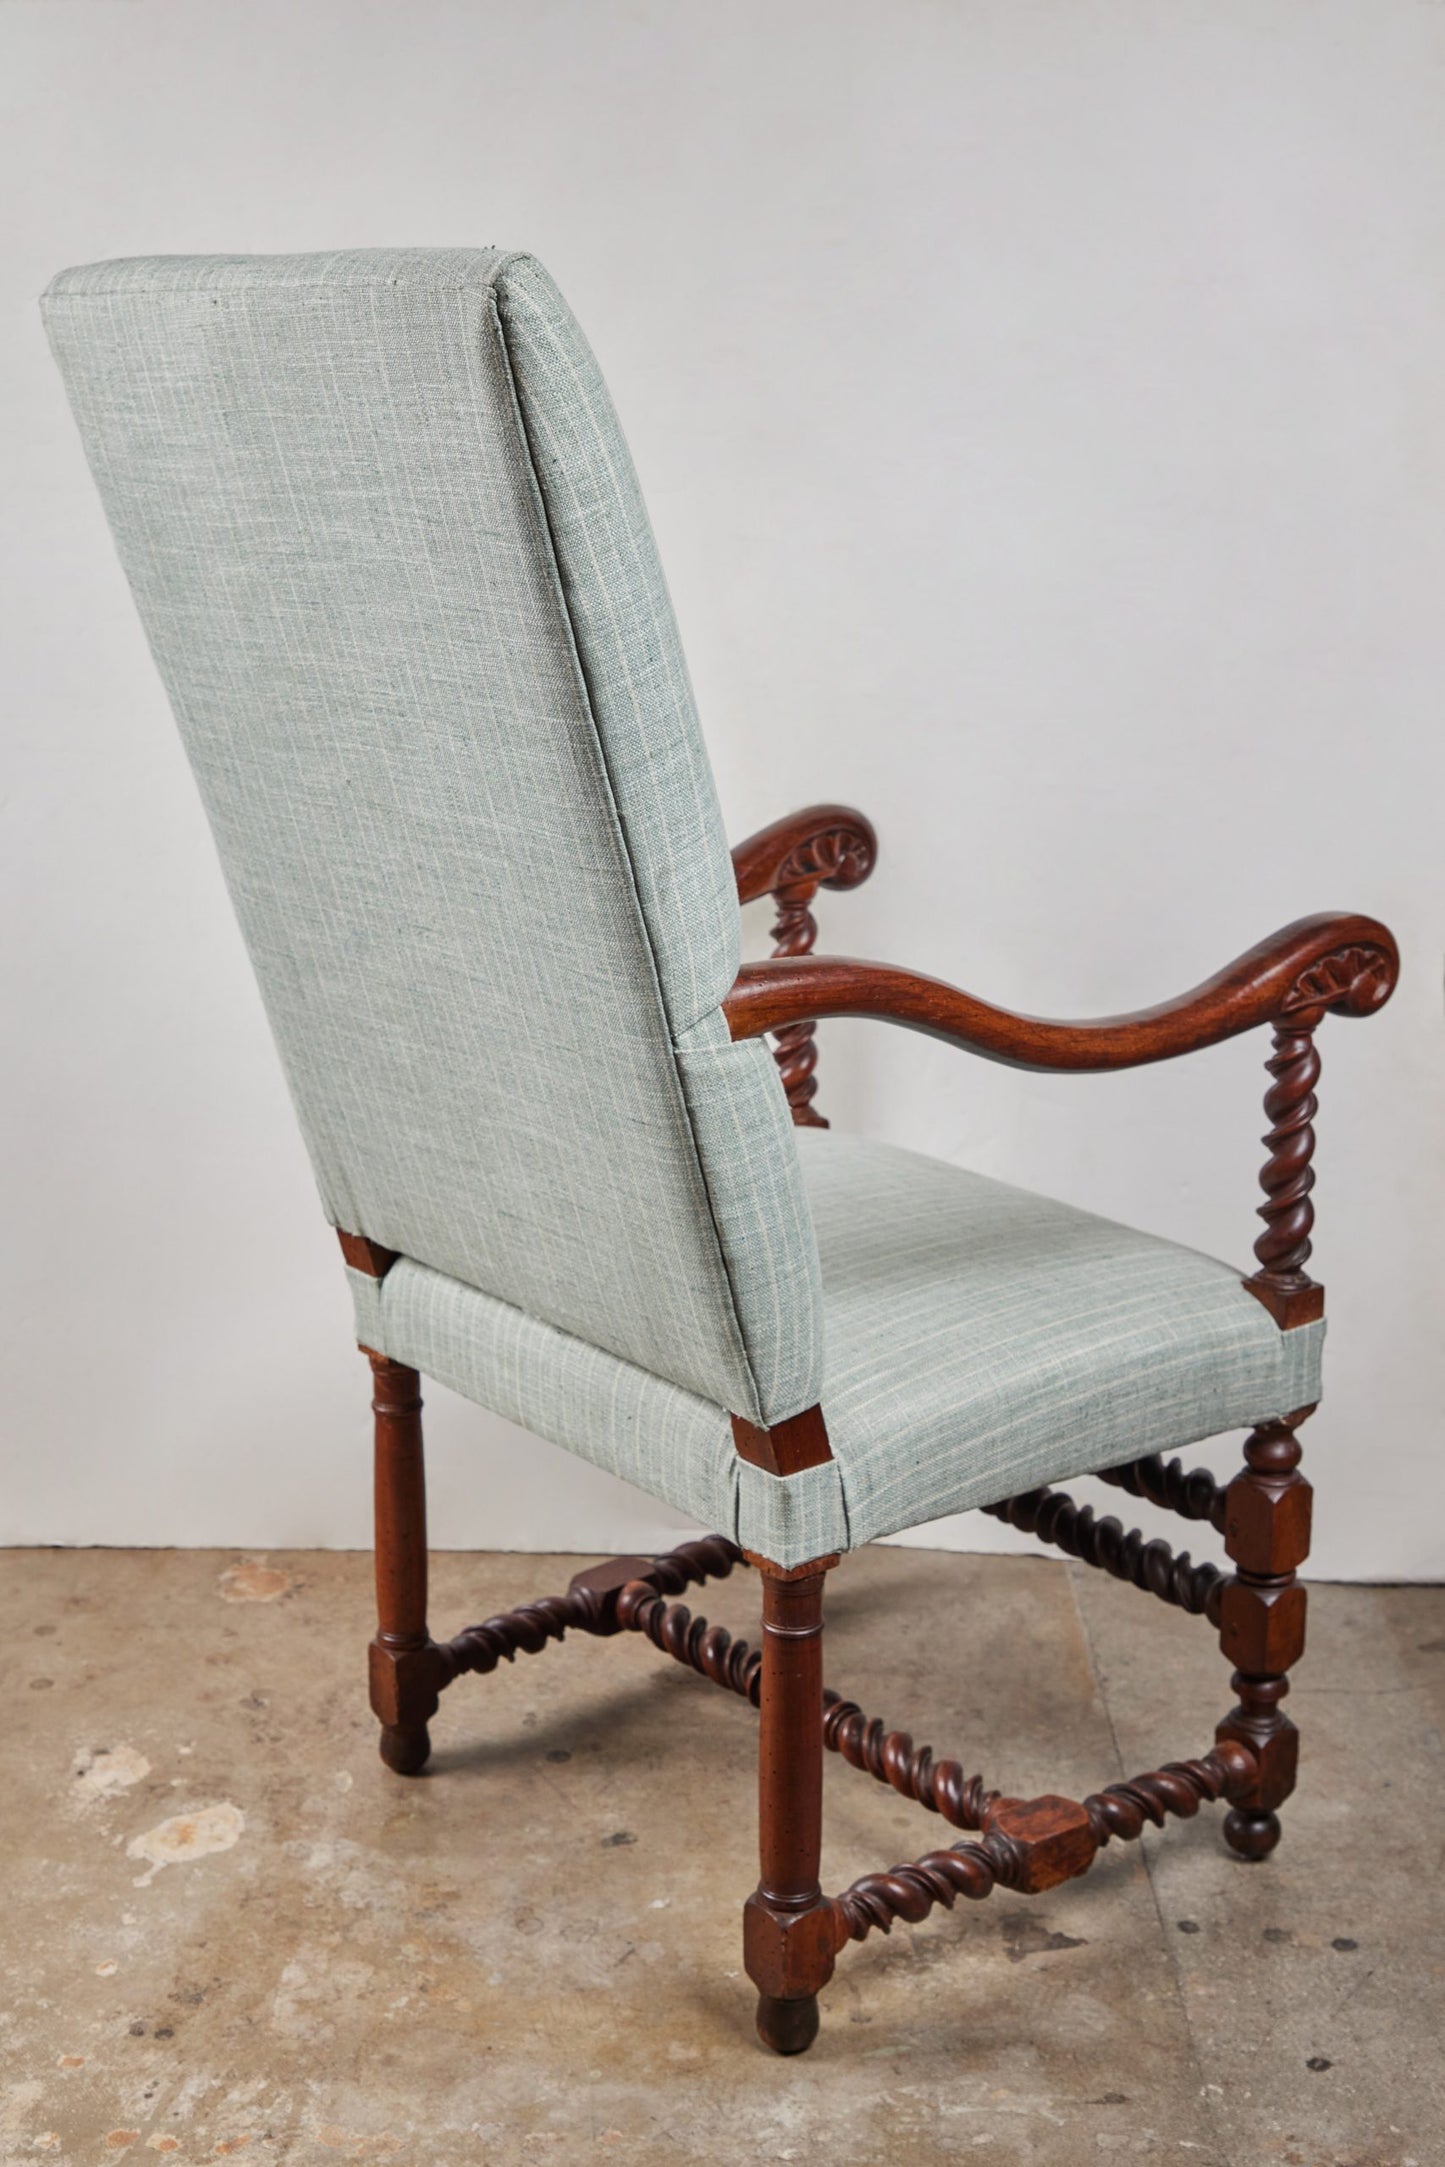 Pair of 19th Century Hall Chairs